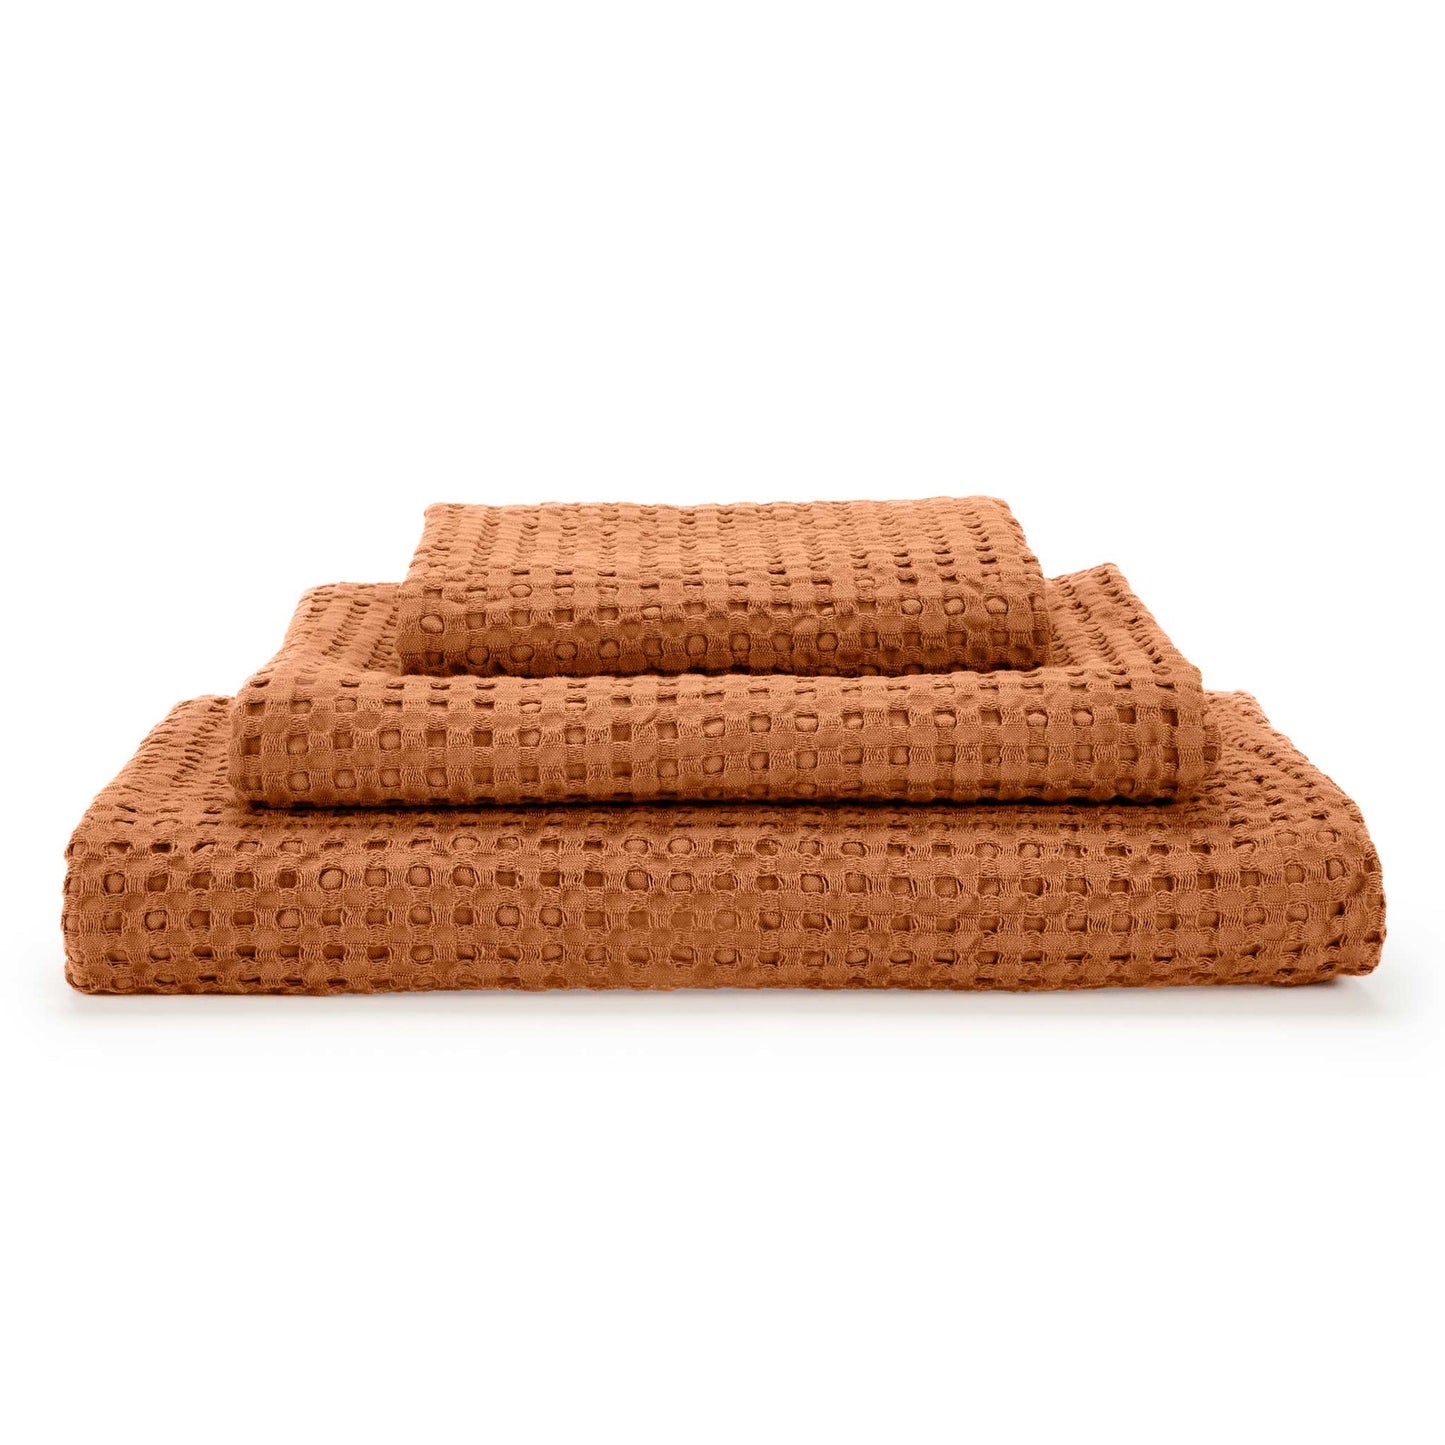 Pousada Most Soft and Absorbent Egyptian cotton towels - 737 Caramel - |VESIMI Design| Luxury and Rustic bathrooms online